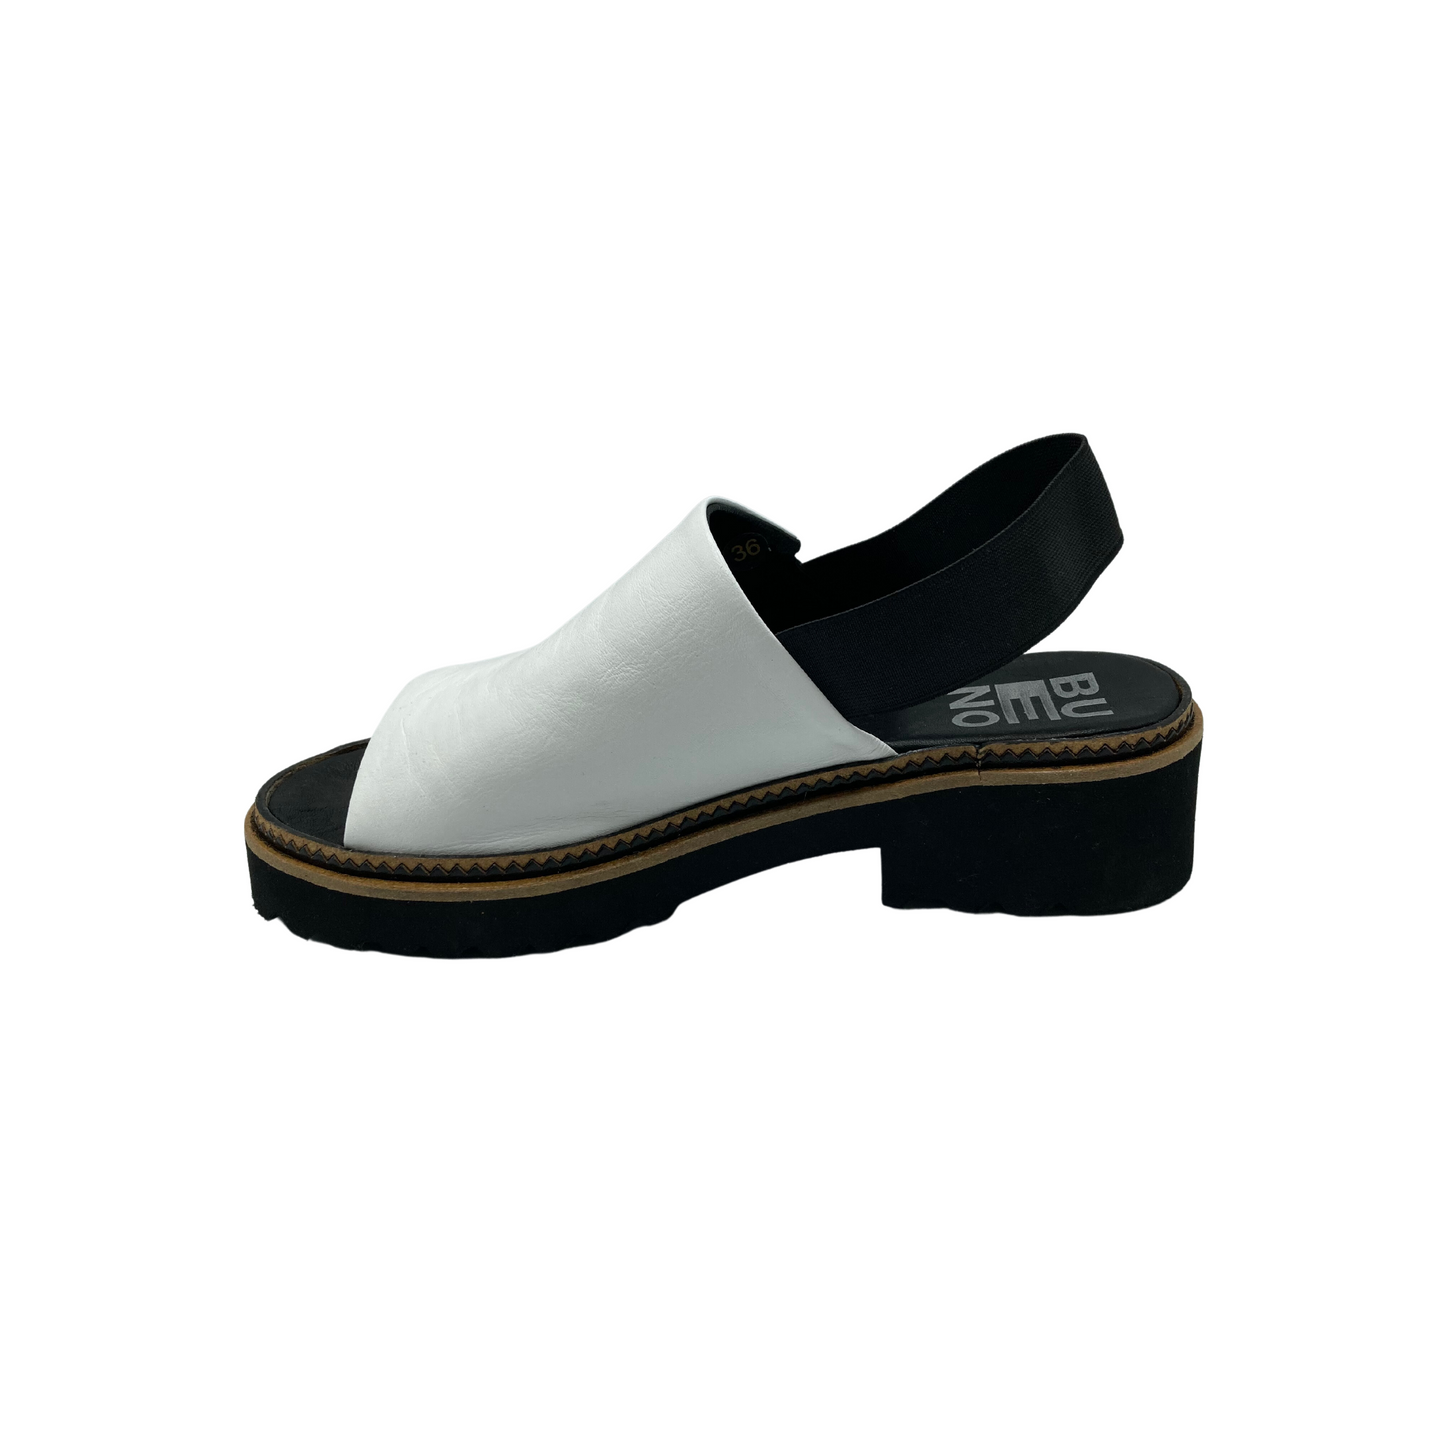 Slip on style sandal with elastic back strap. Wide leather upper offers great coverage.  Open toe